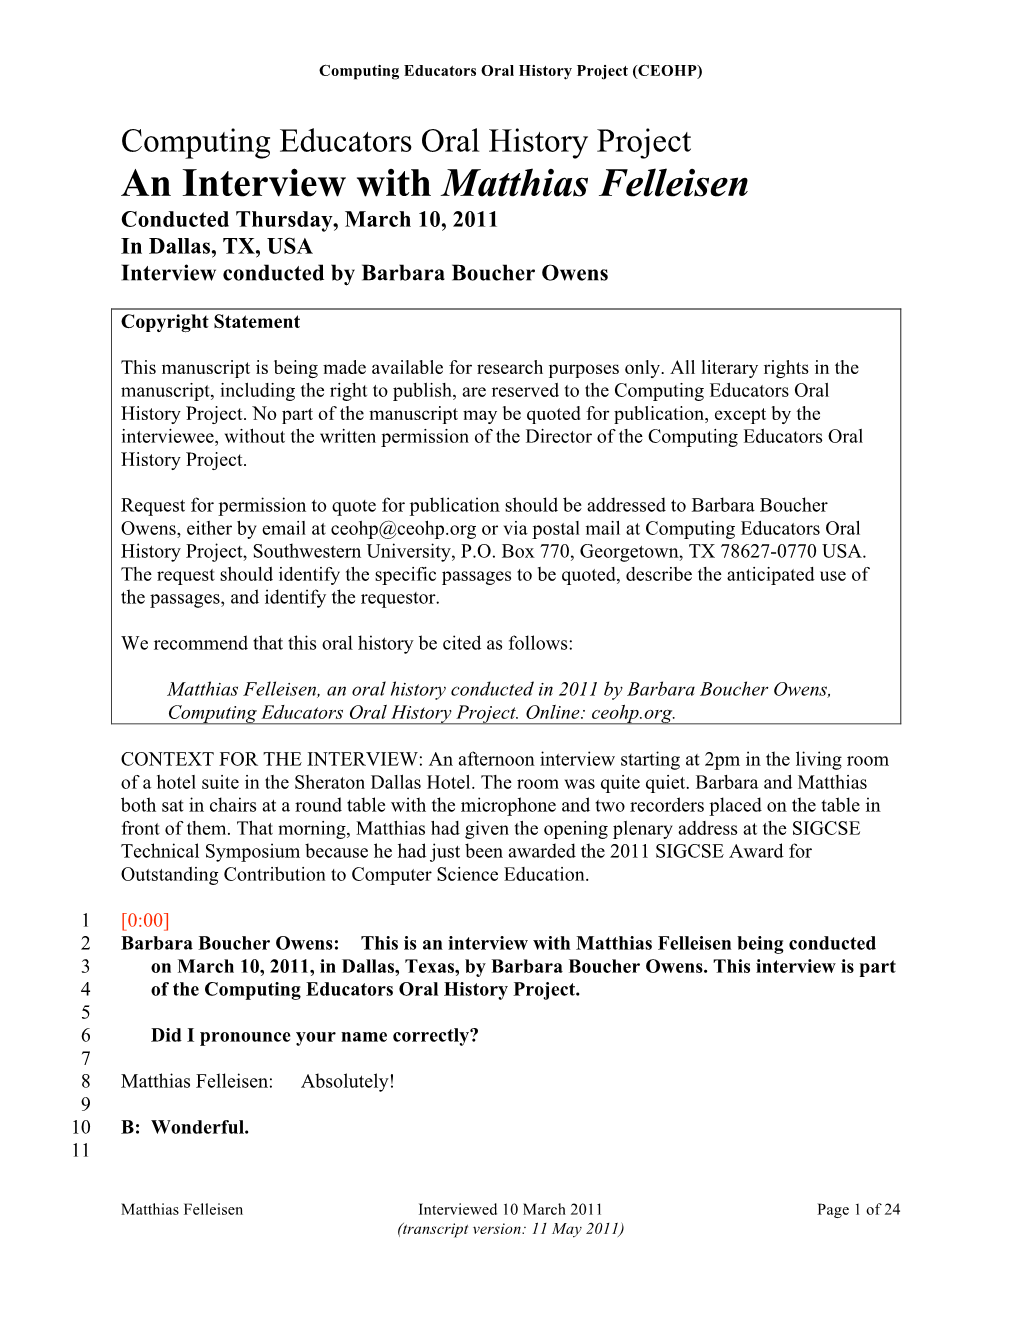 An Interview with Matthias Felleisen Conducted Thursday, March 10, 2011 in Dallas, TX, USA Interview Conducted by Barbara Boucher Owens